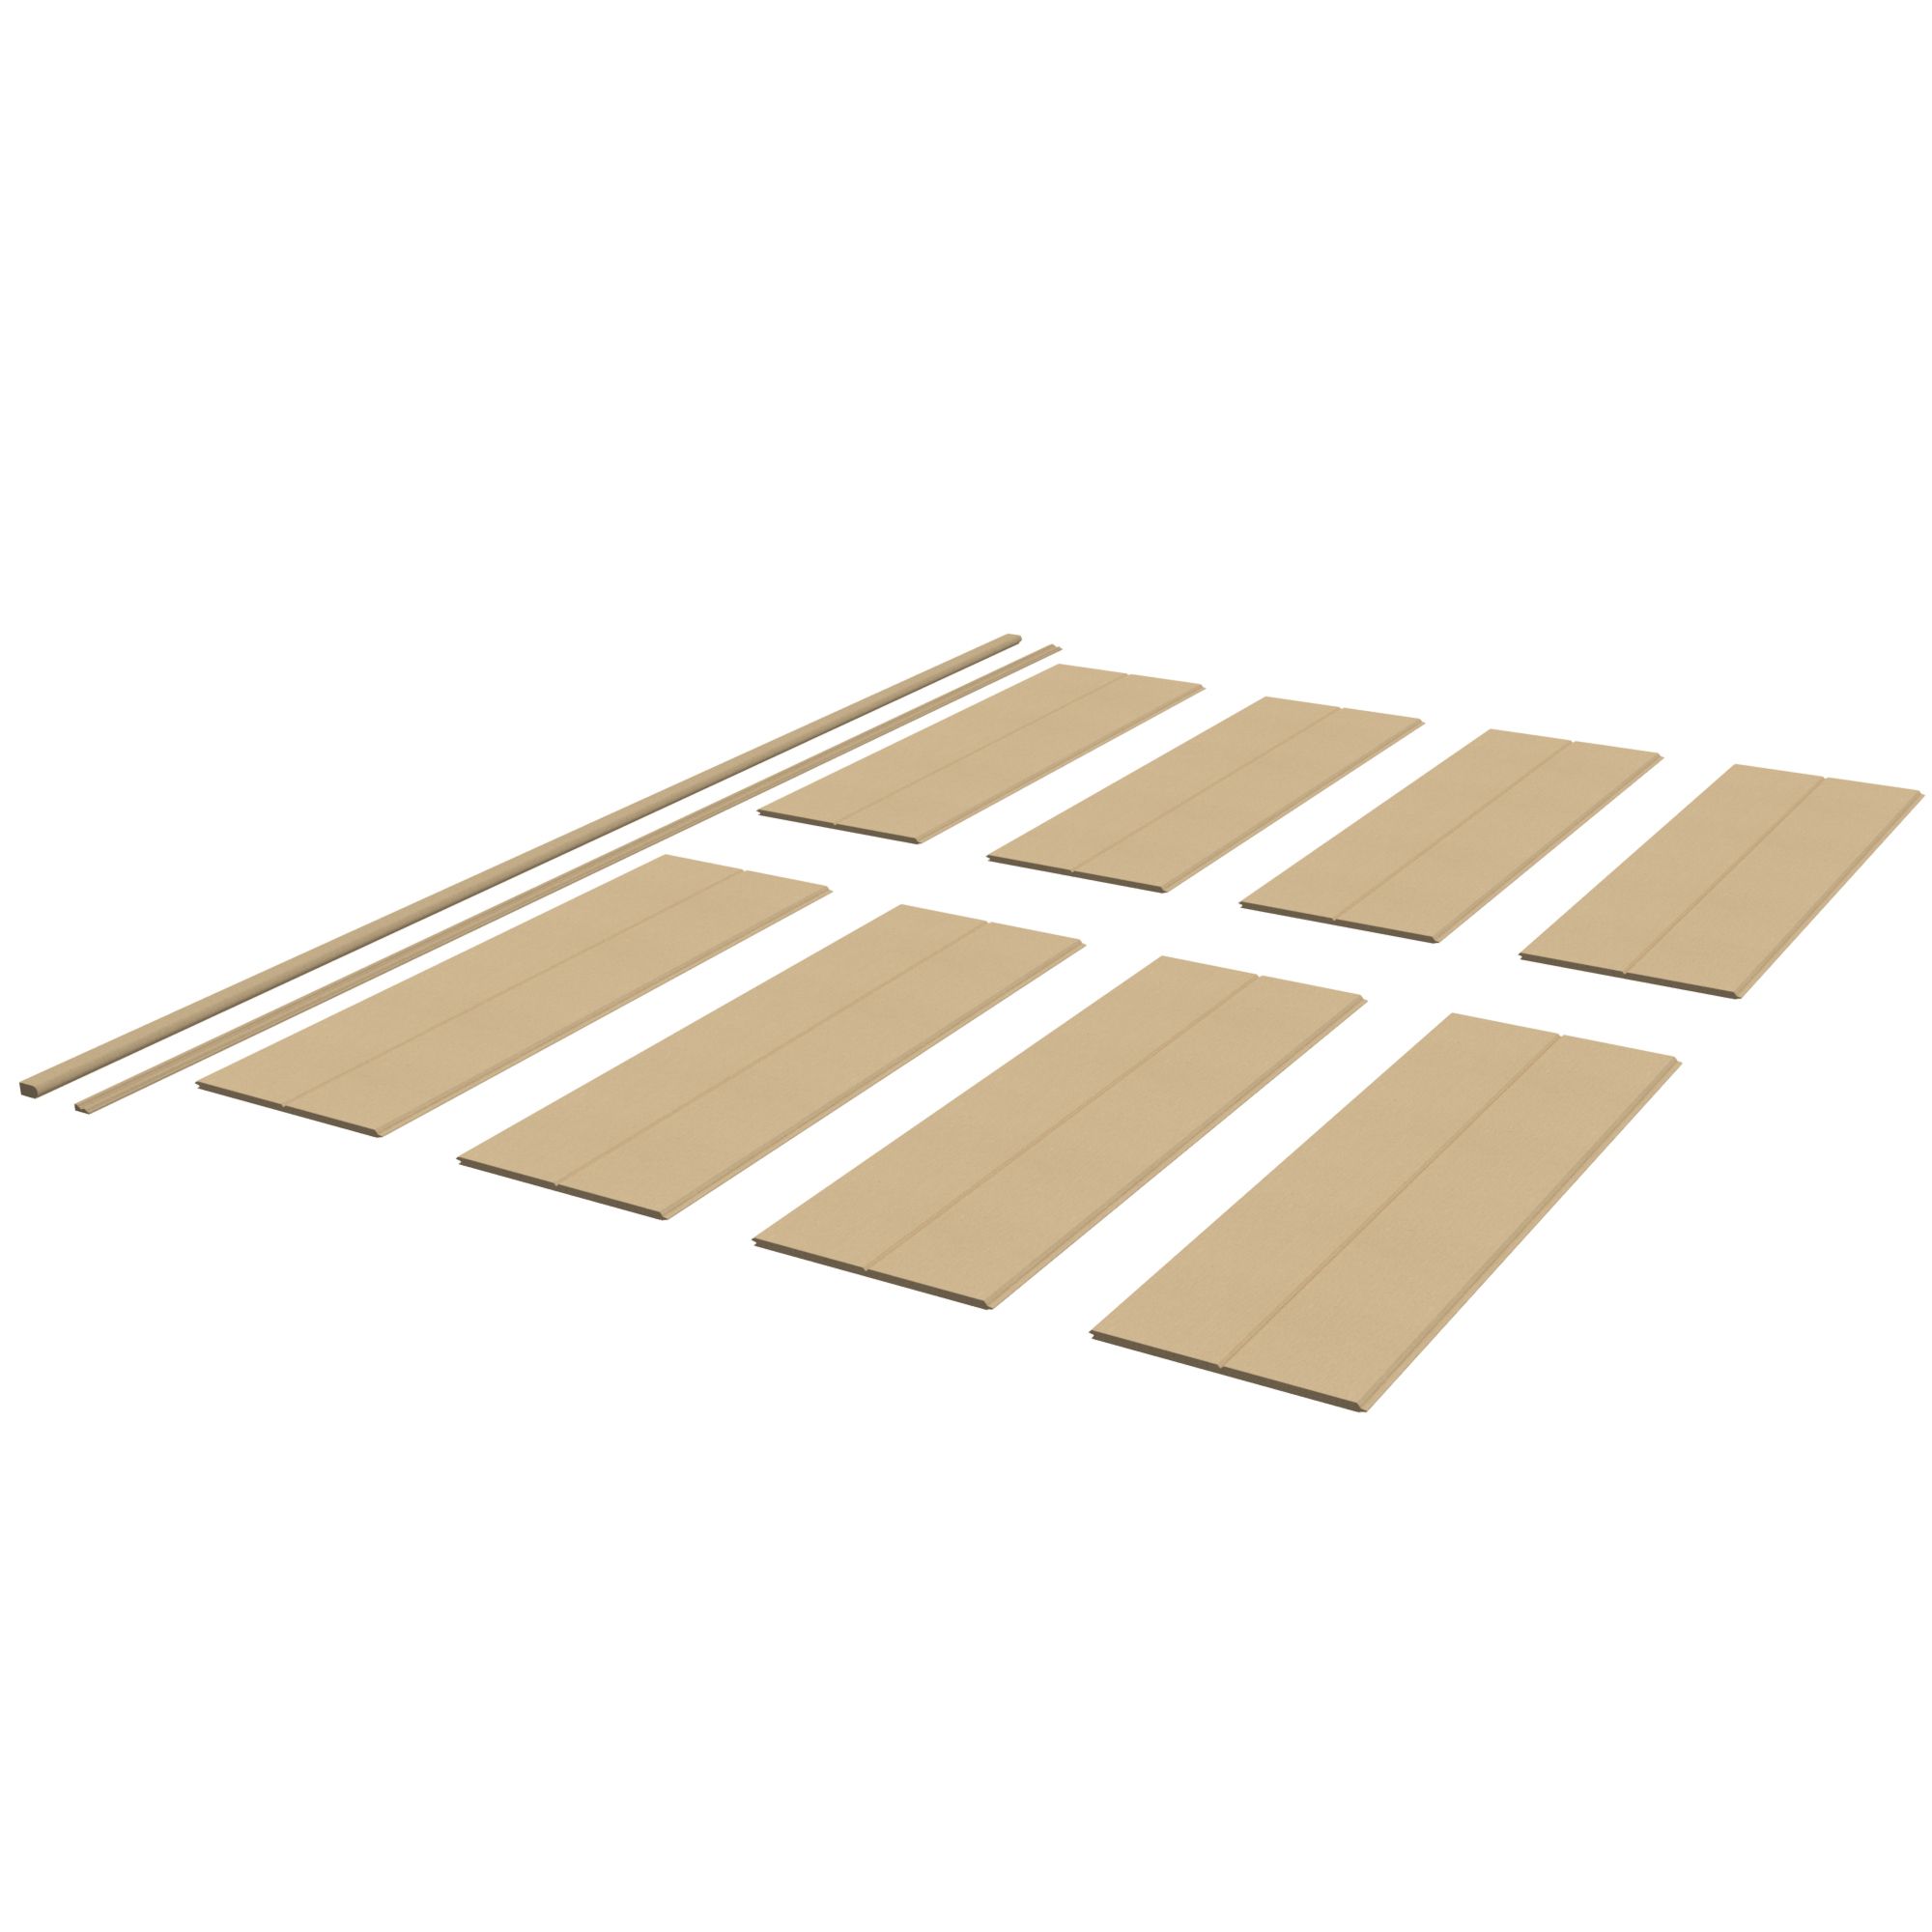 Cheshire Mouldings MDF Wall panelling kit (H)2000mm (W)250mm (T)9mm